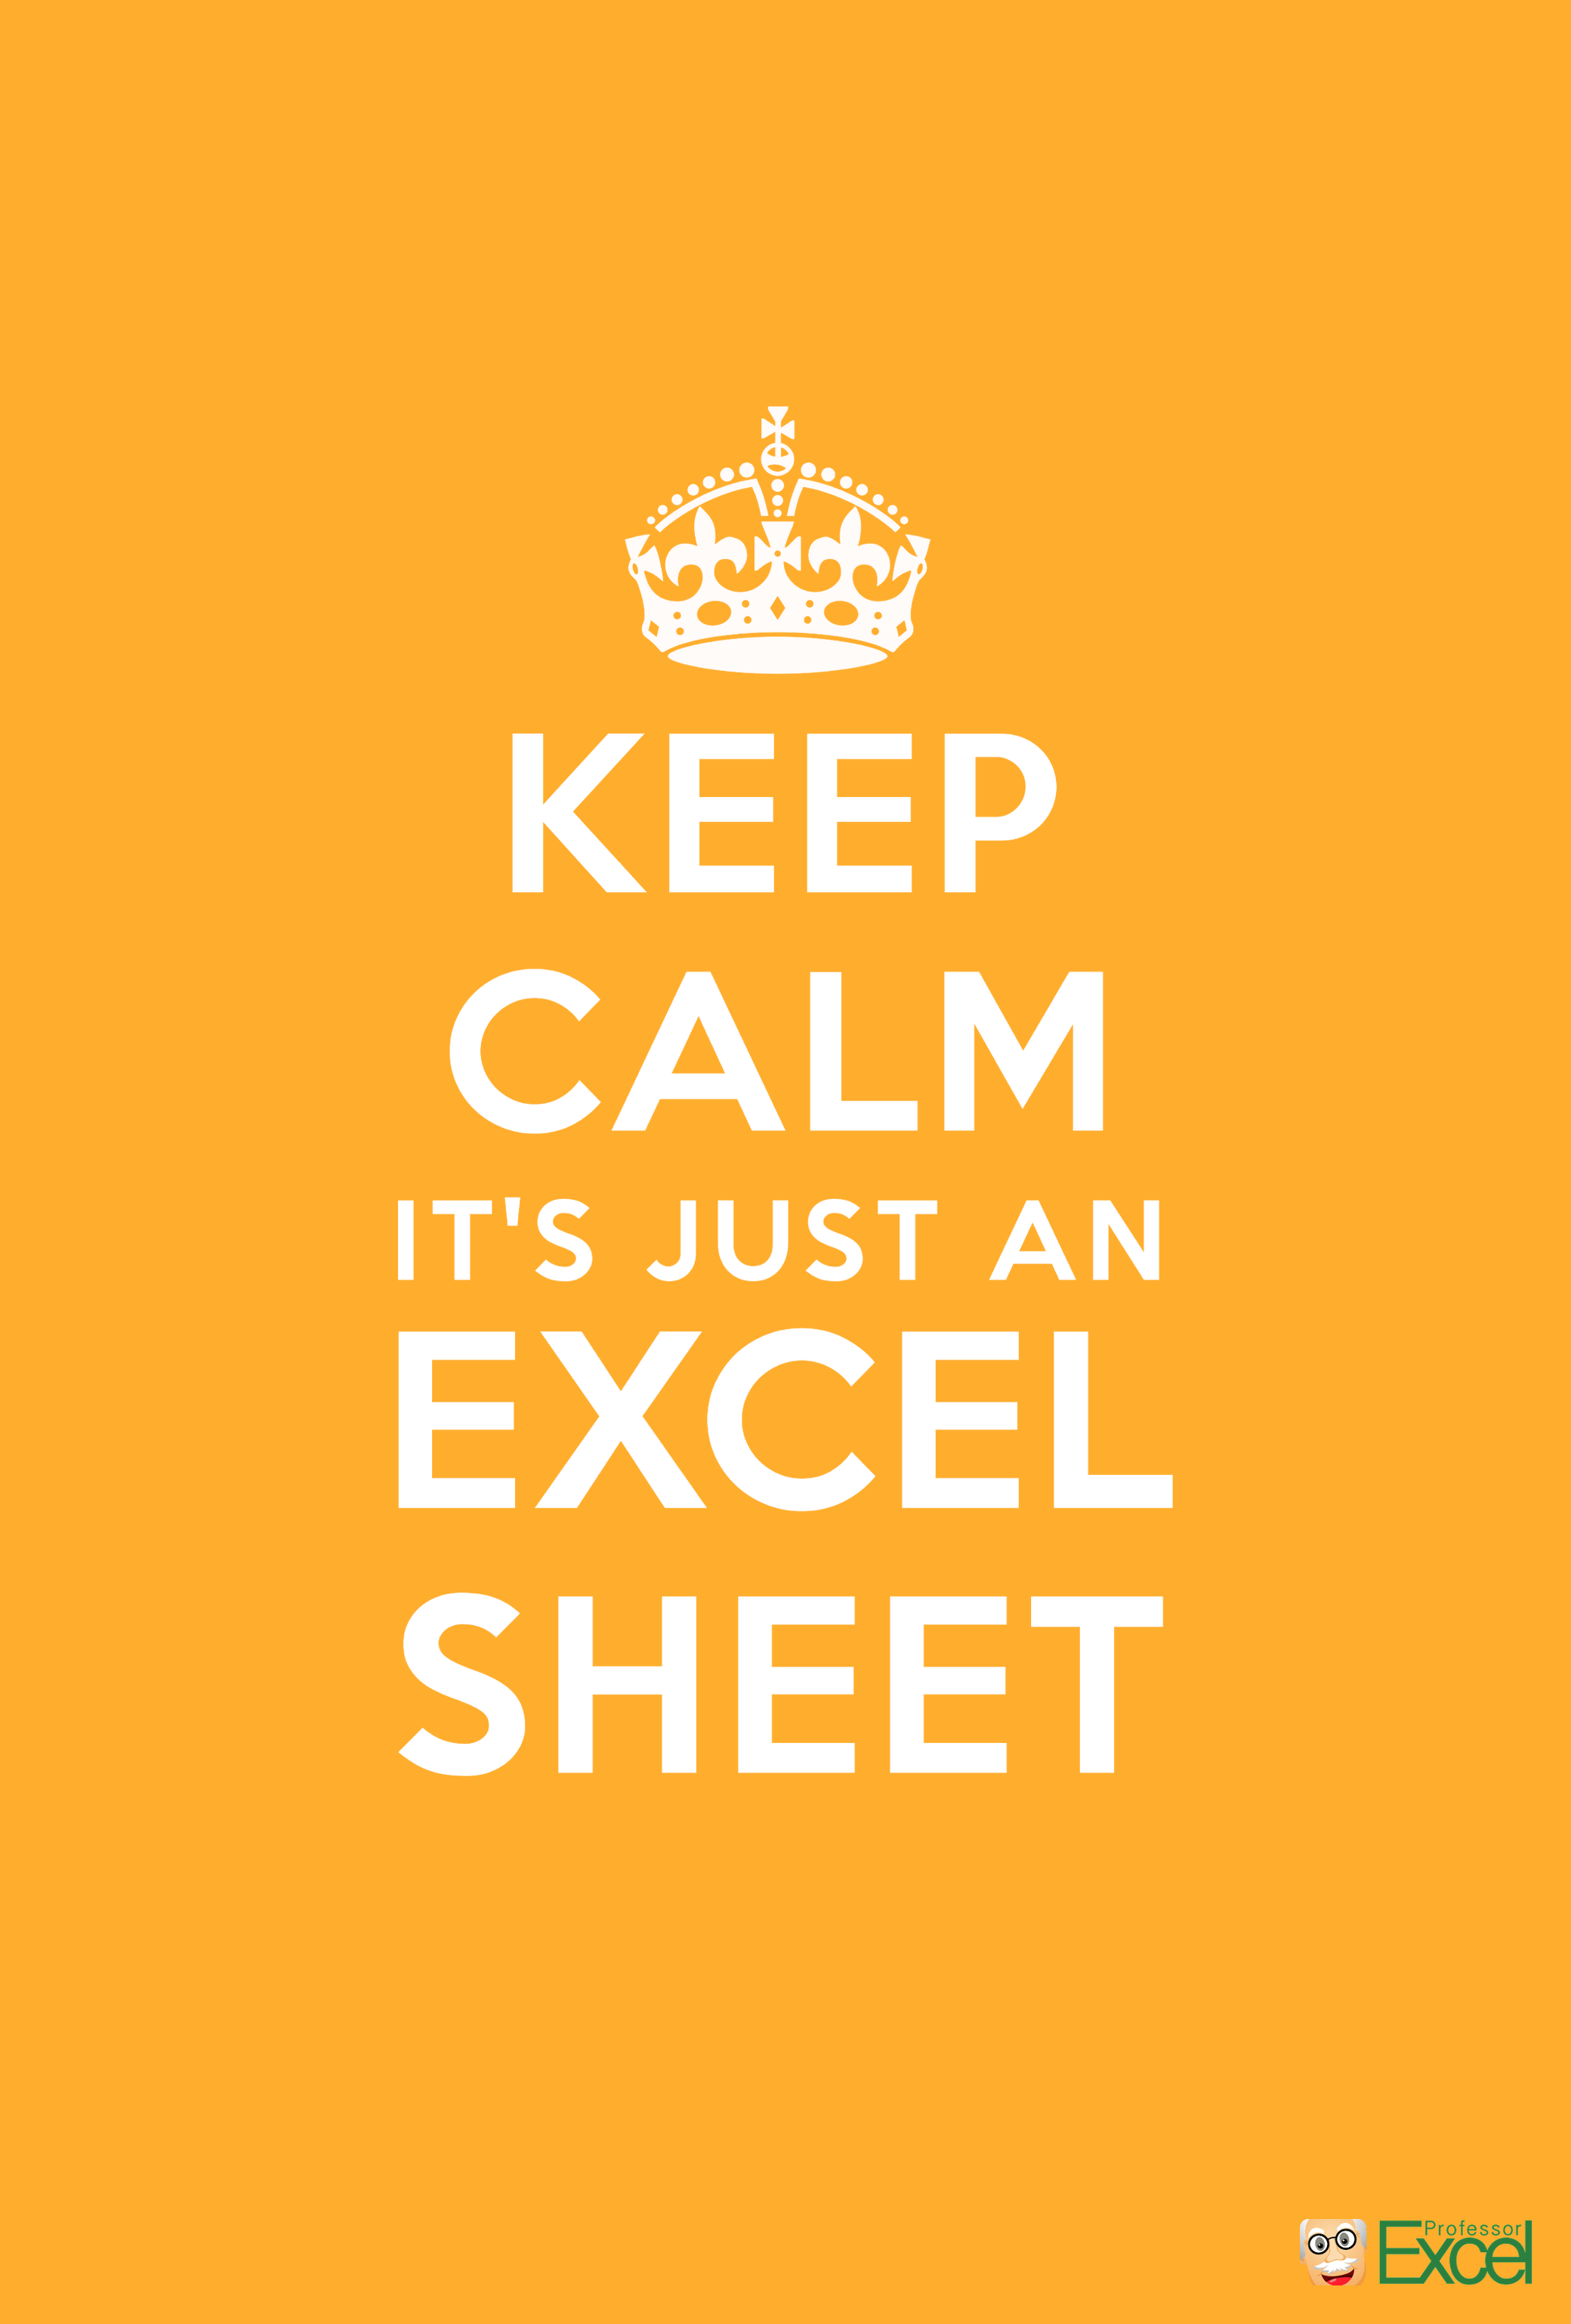 Excel Wallpaper for Free Download